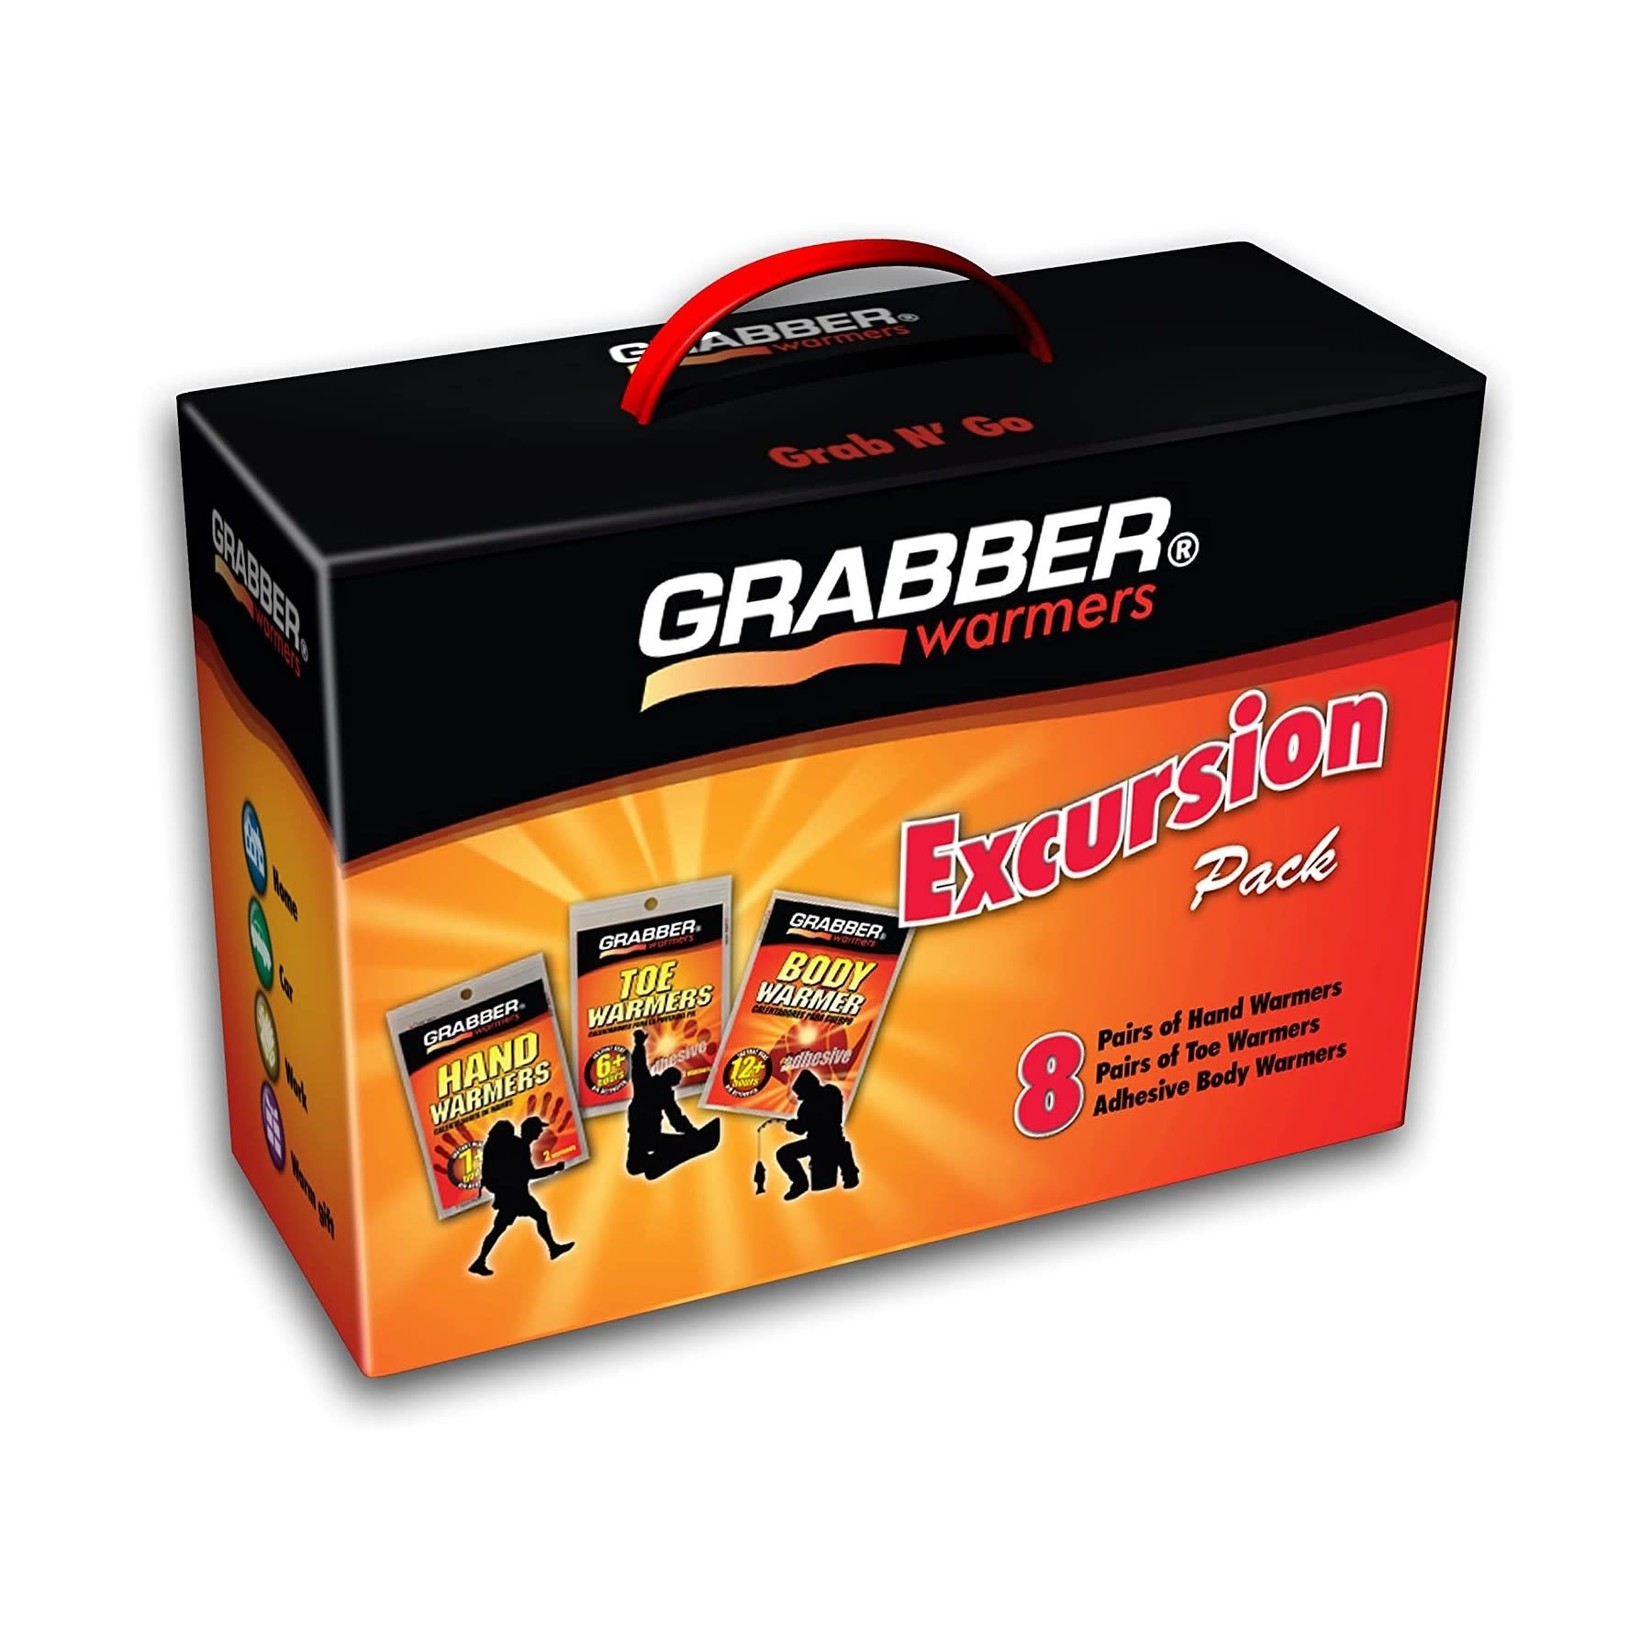 a1imports Excursion pack Grabber Warmer